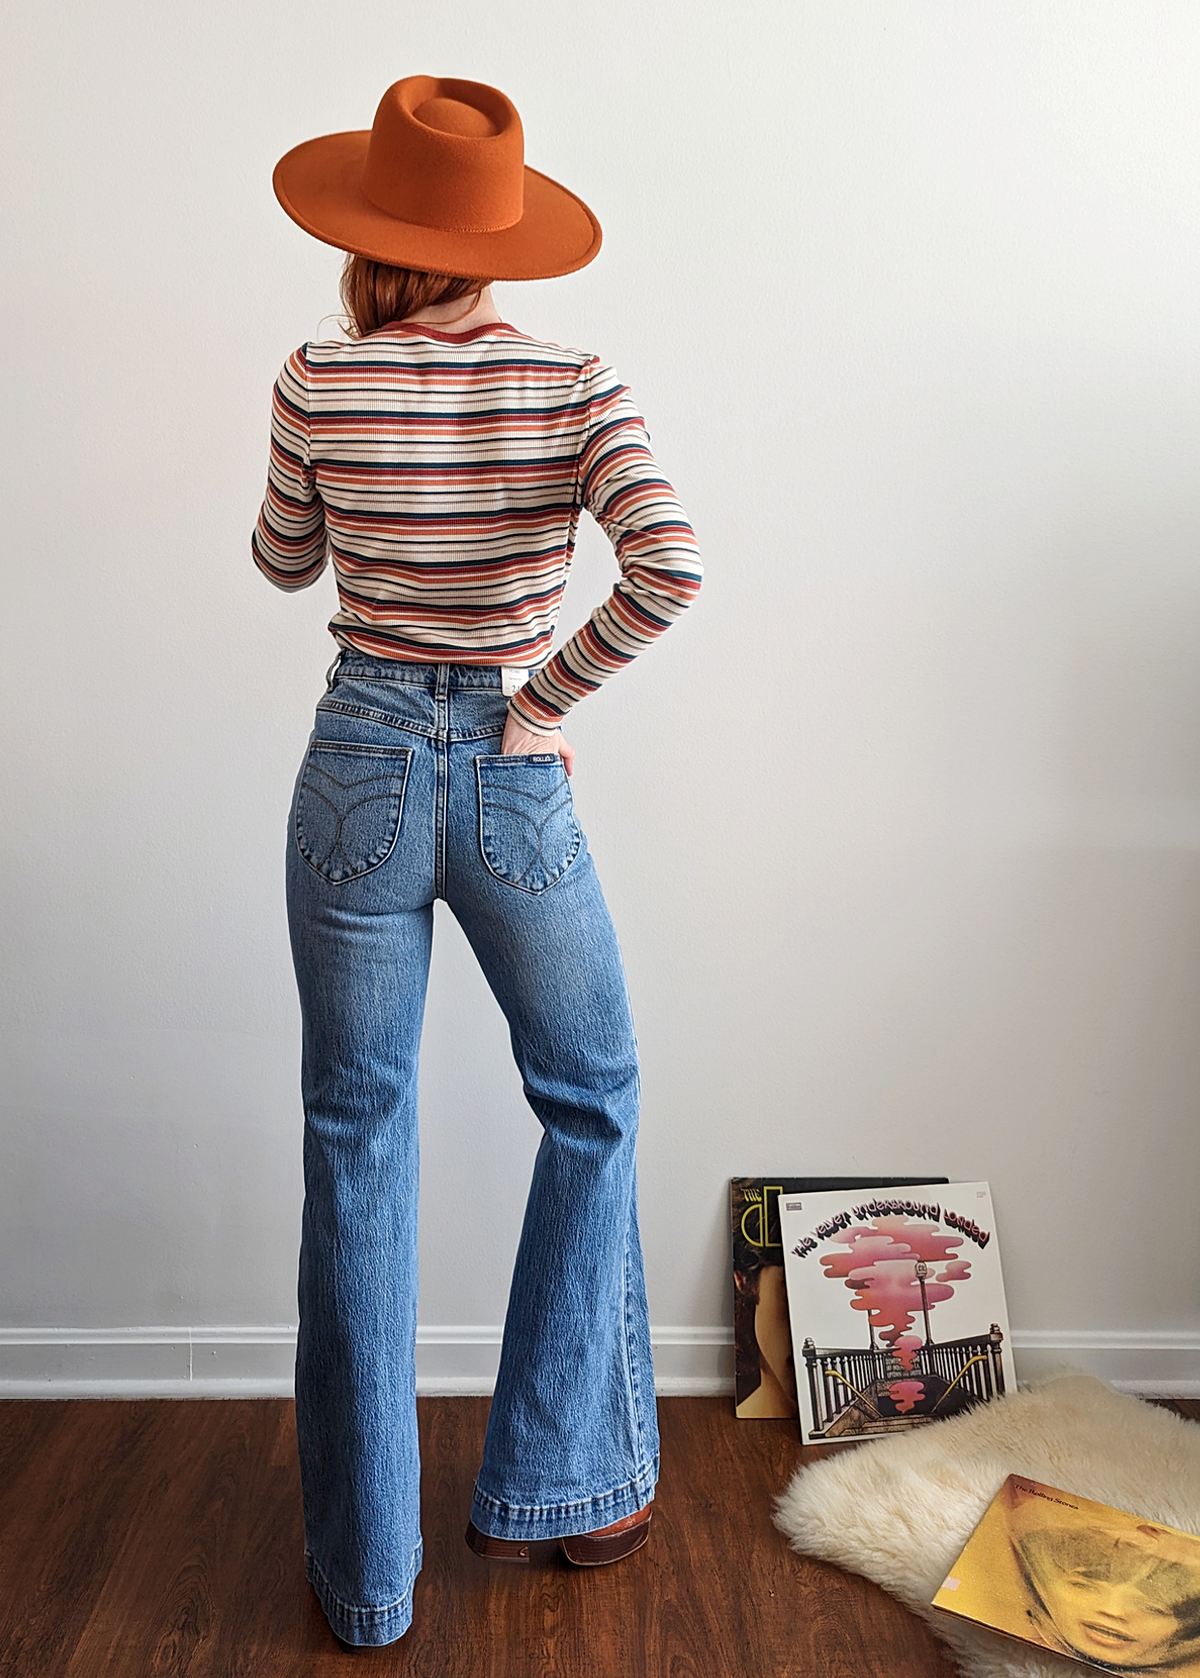 The Rolla's Jeans Salty Blue Denim Eastcoast Flares. 70s inspired bell bottom jeans with a high rise waist and faded blue denim wash.